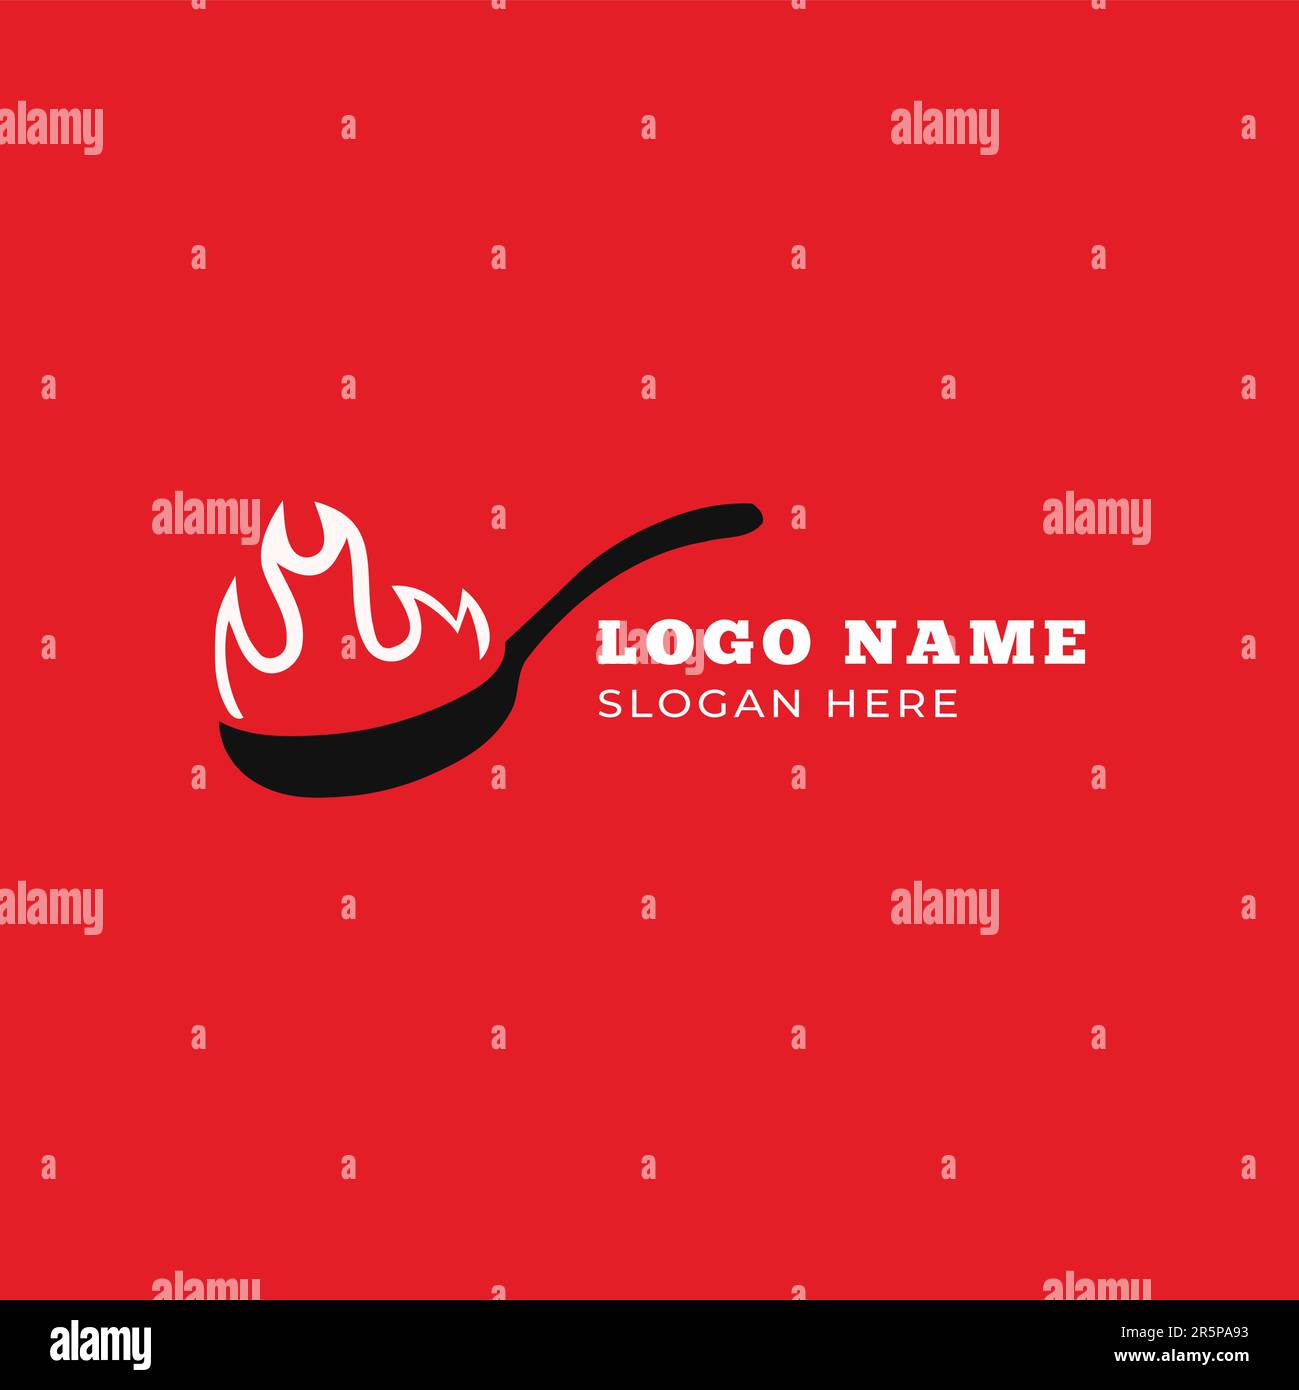 Pan Fire Logo Restaurant logo Design with Red Background Stock Vector